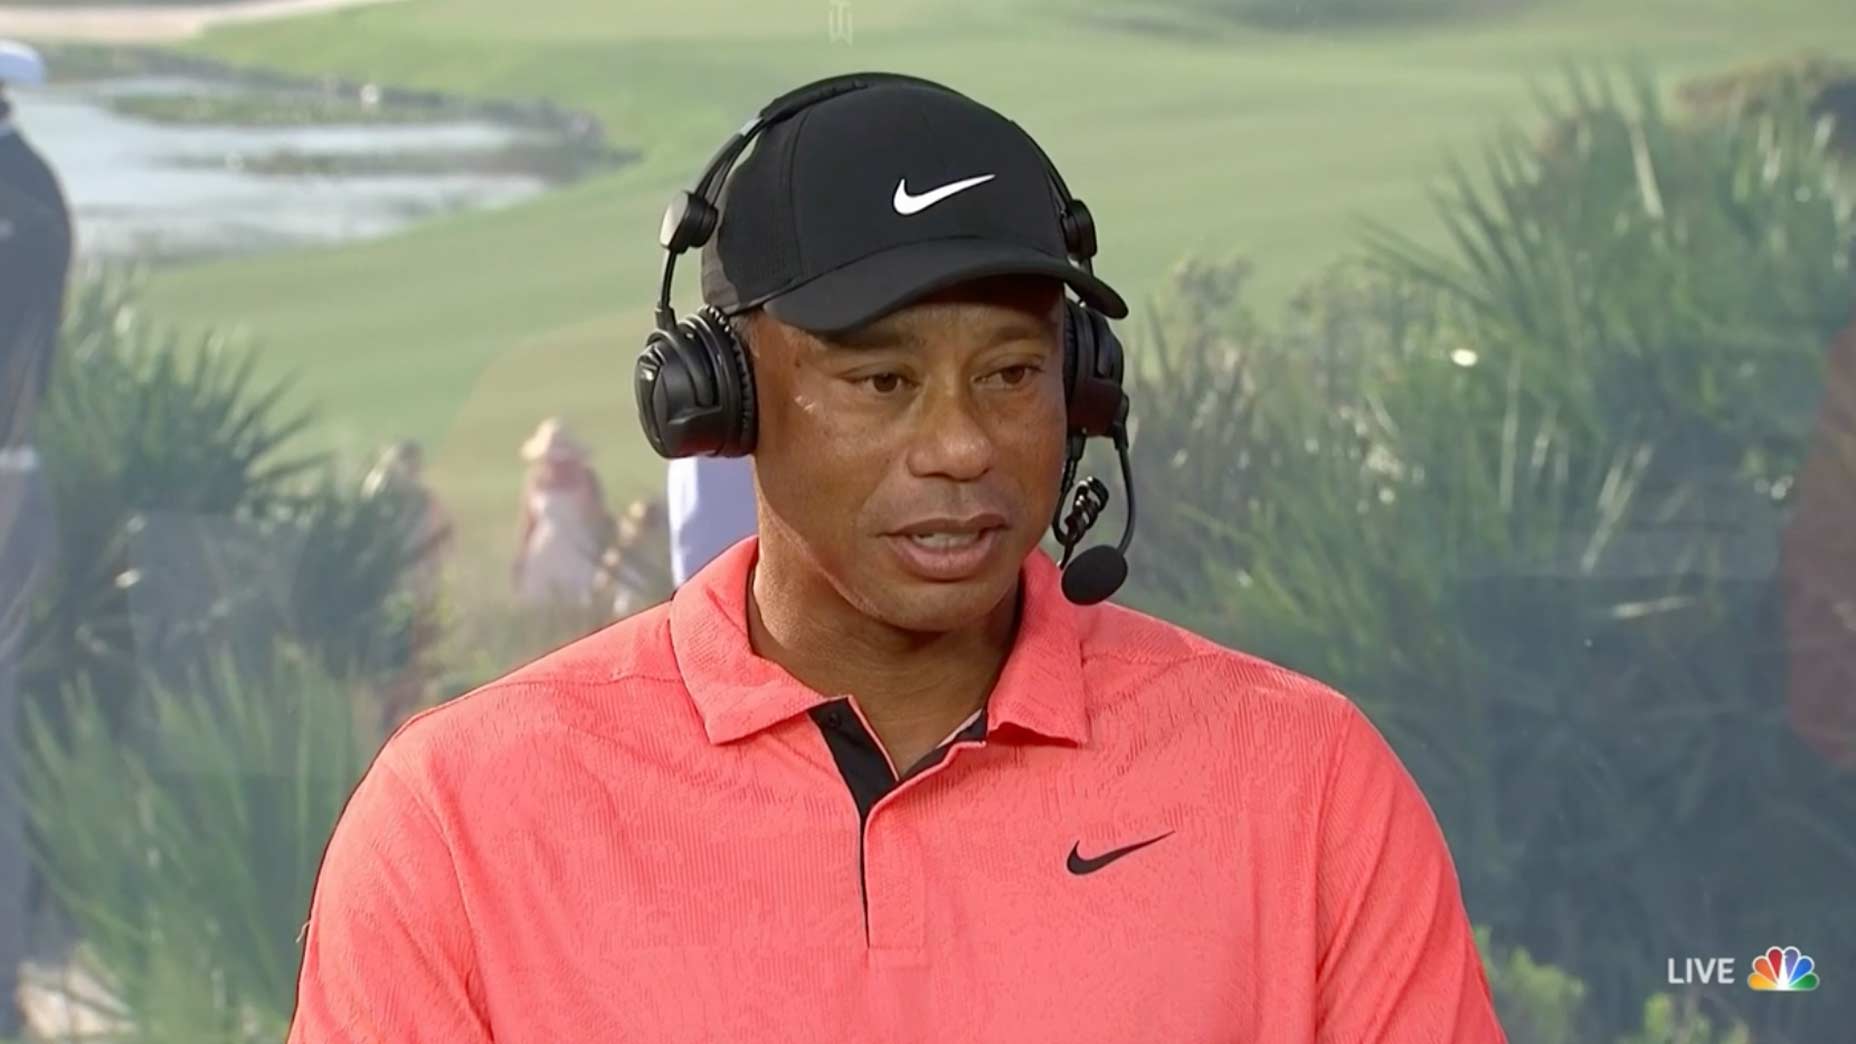 Tiger Woods sat in the NBC booth on Saturday.